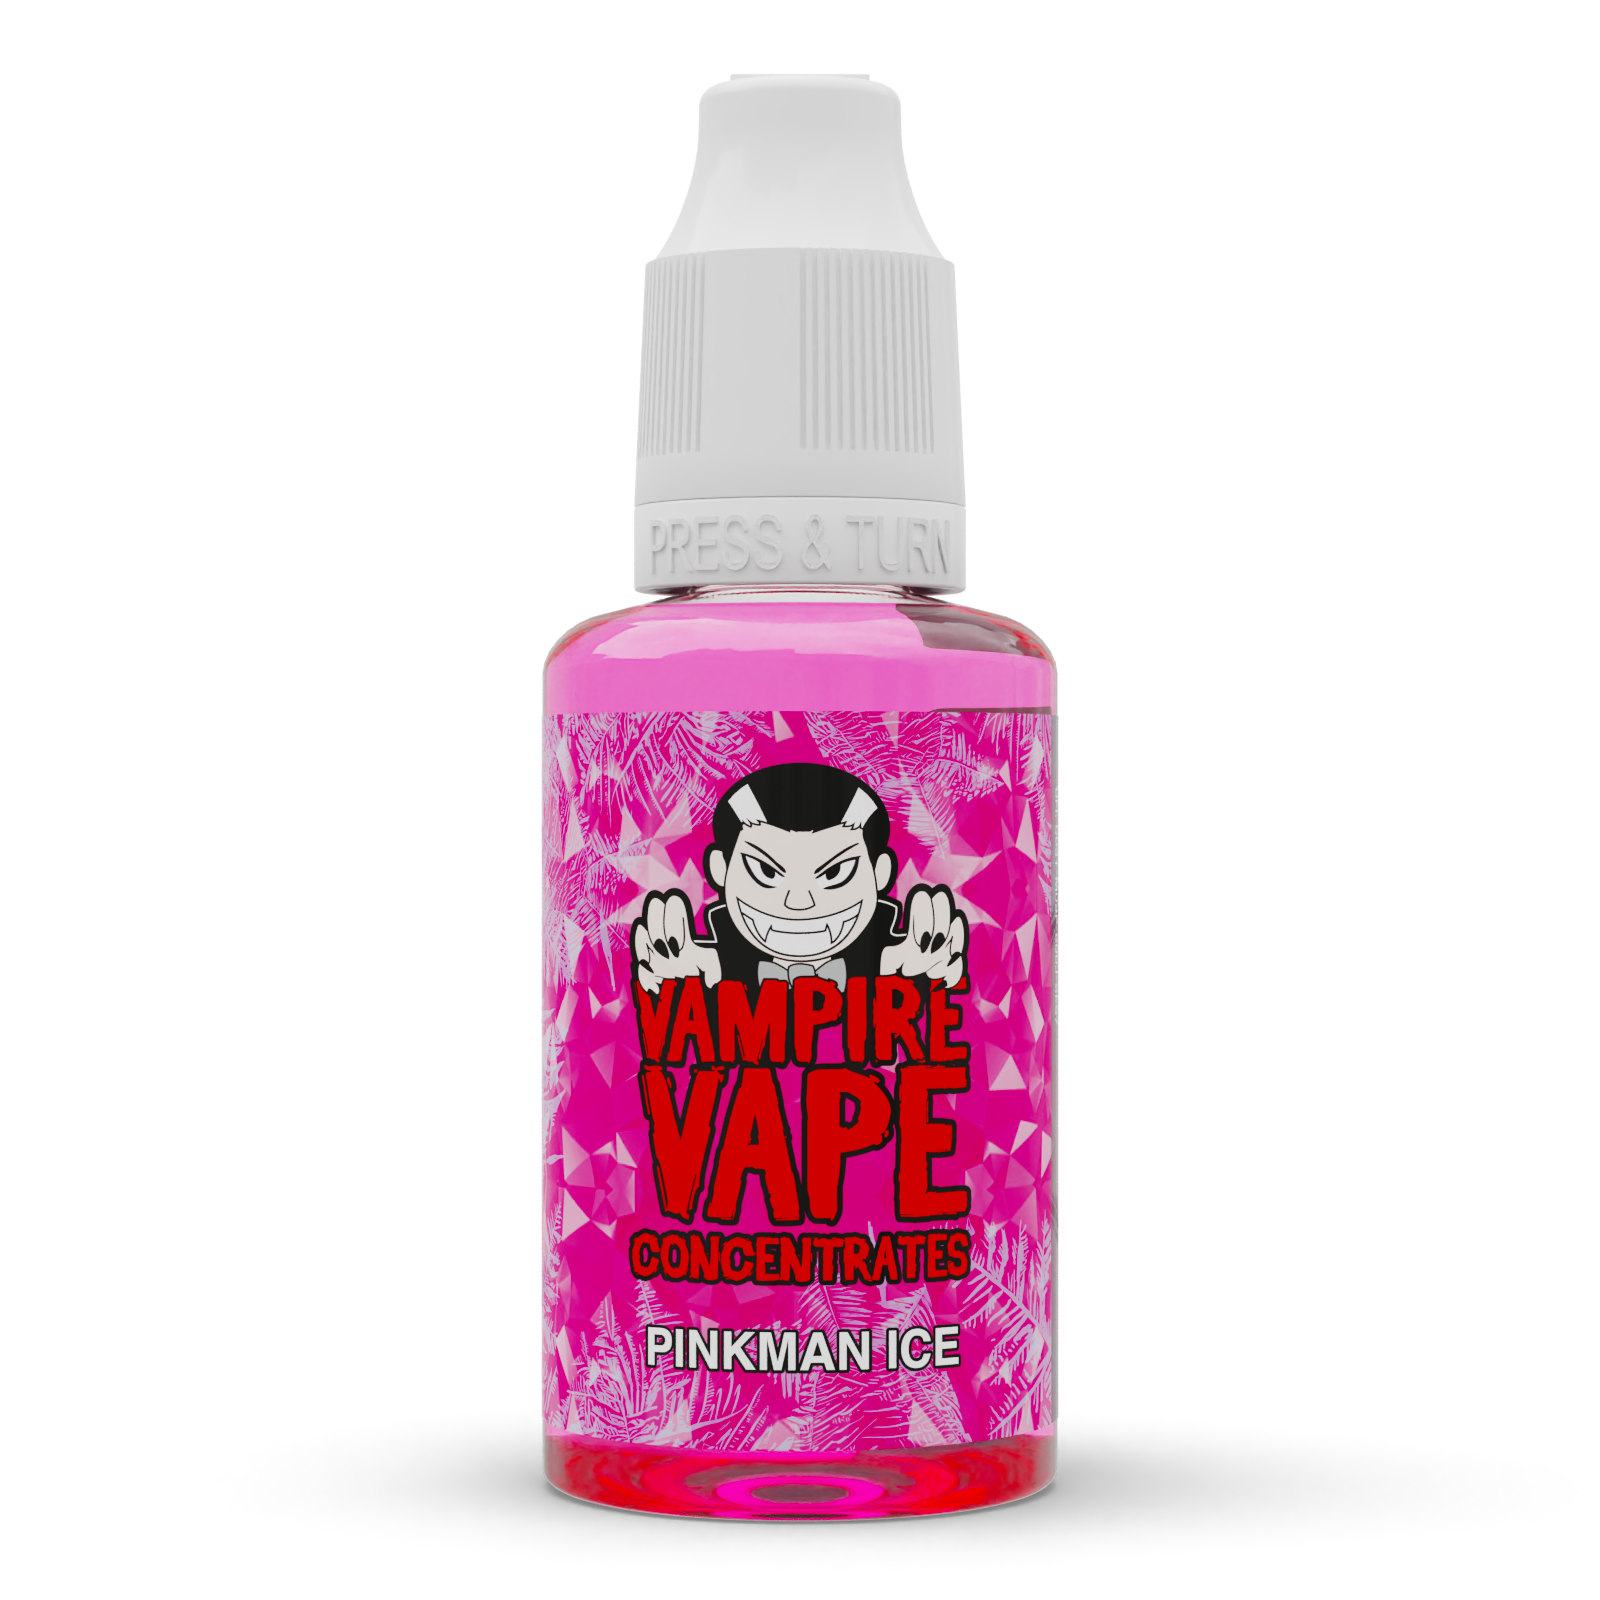 Pinkman Ice Flavour Concentrate by Vampire Vape